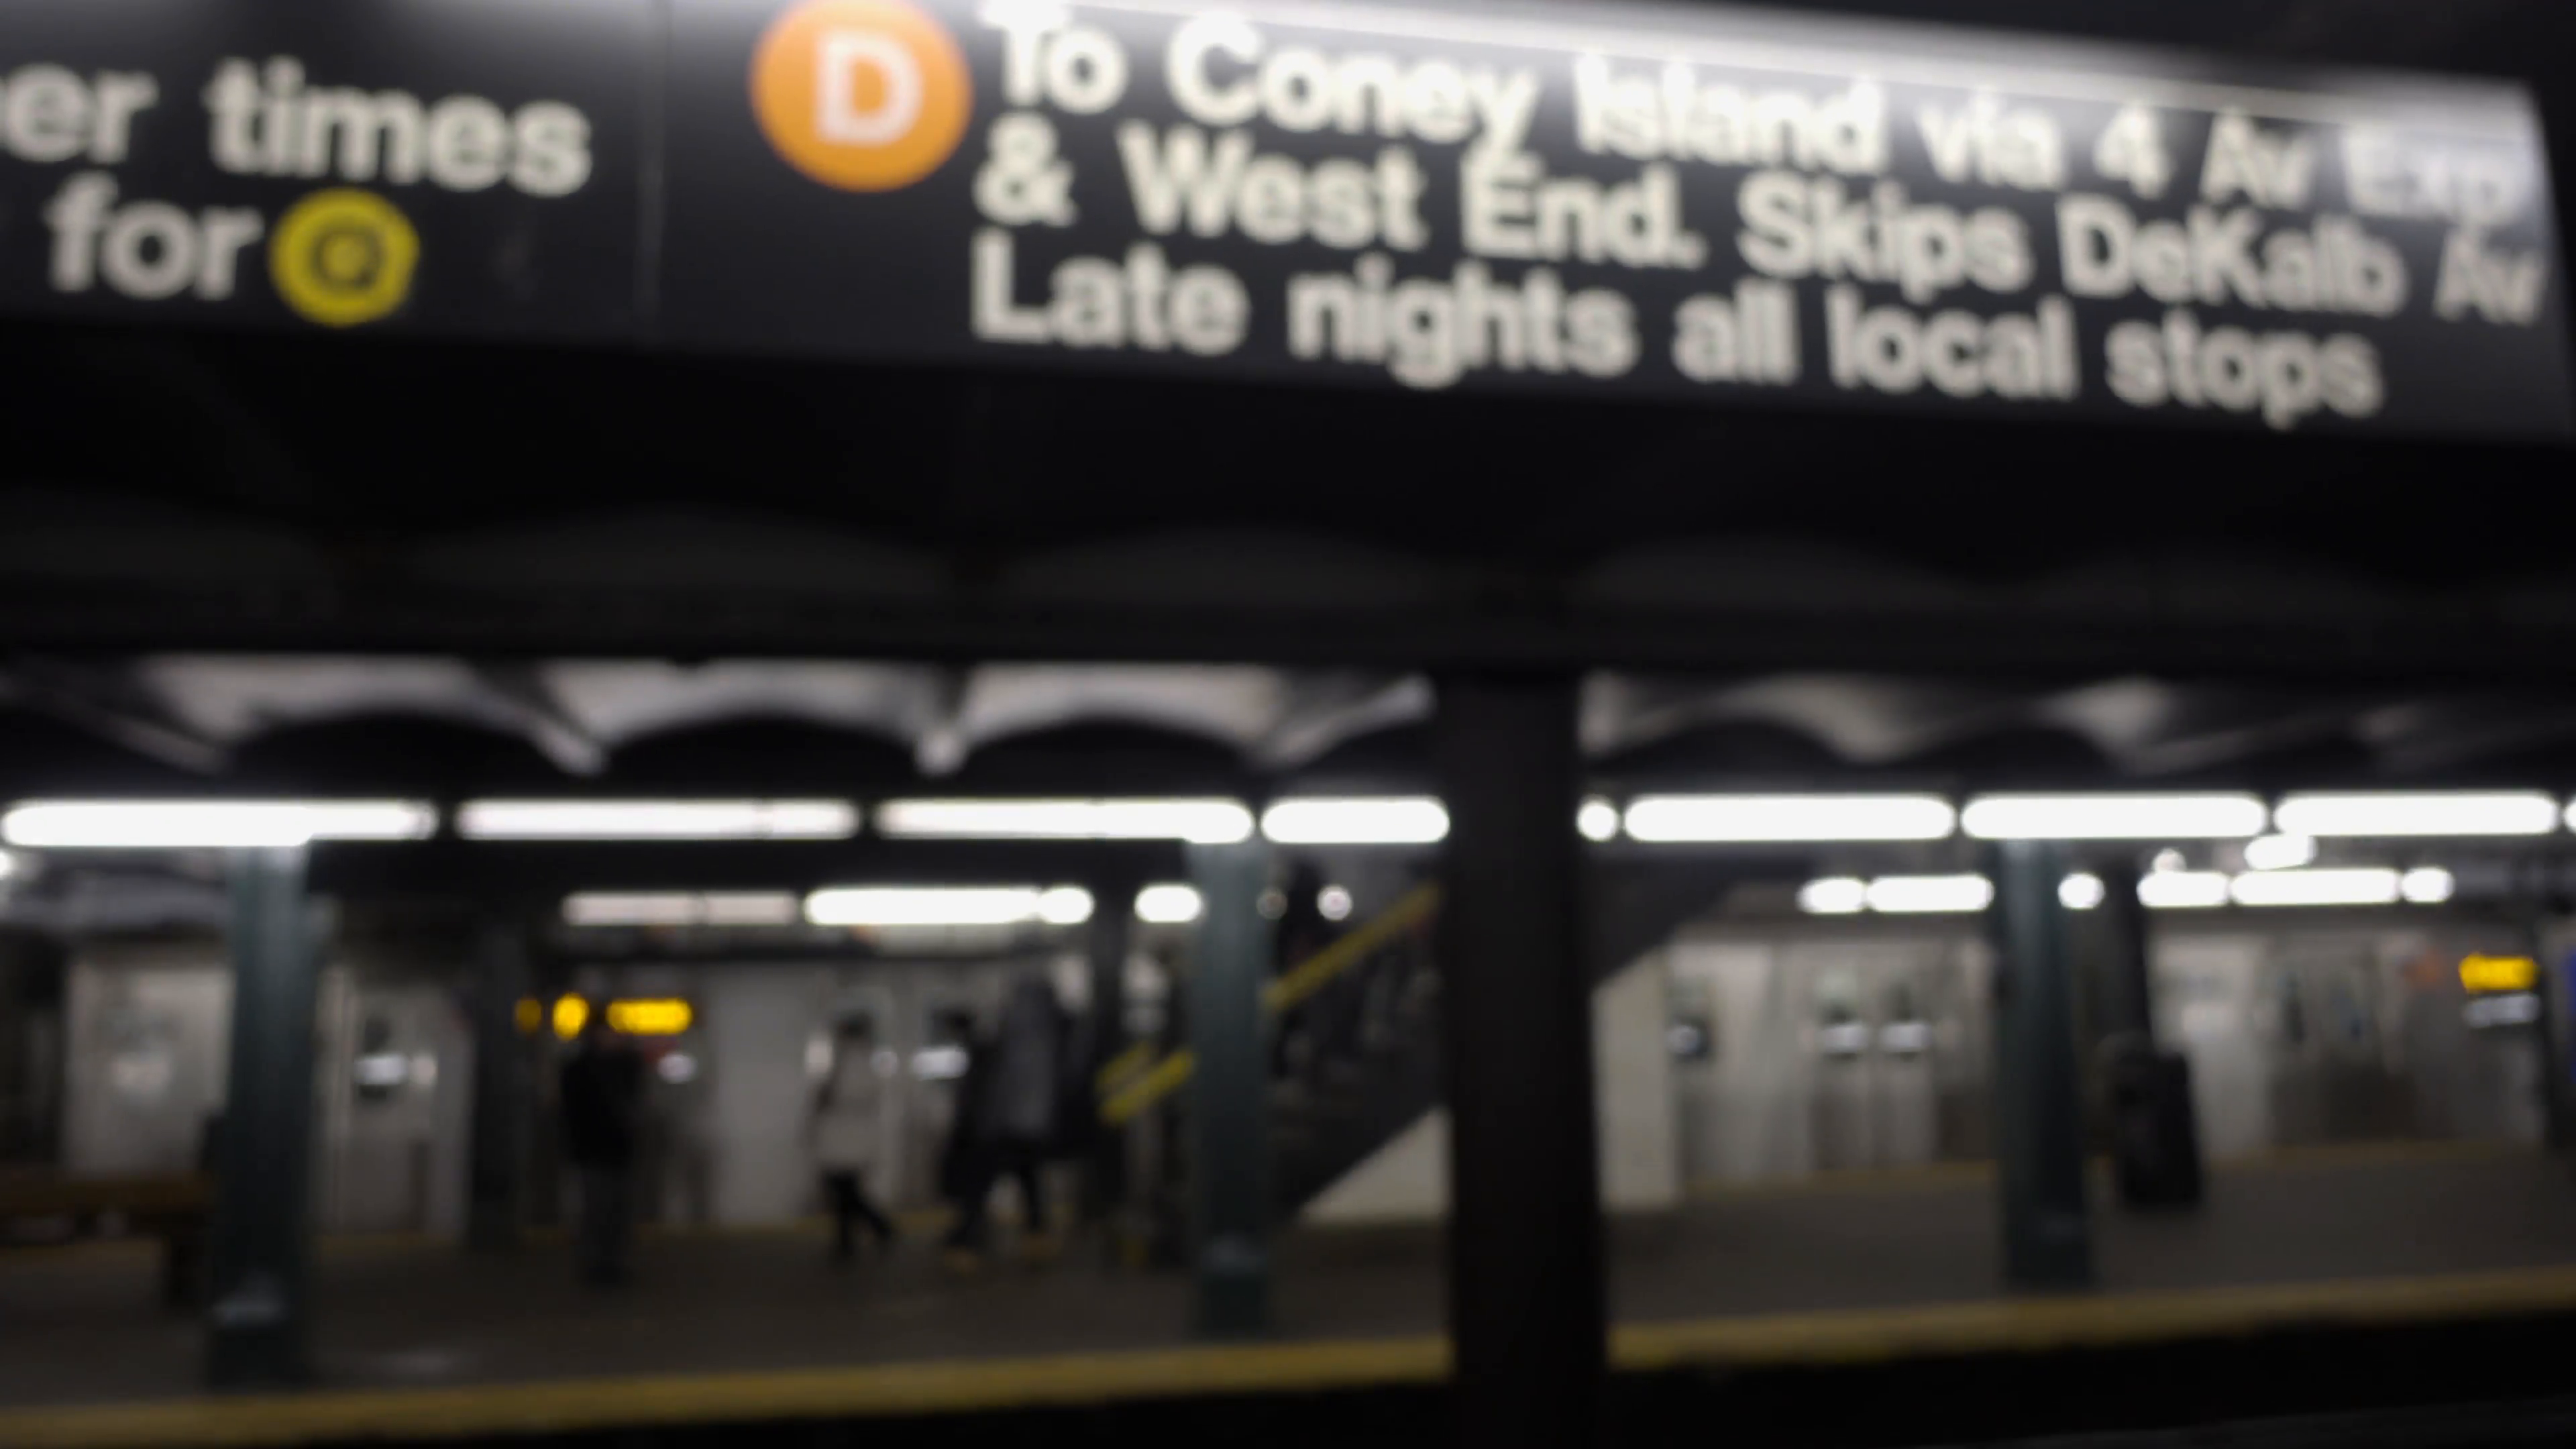 subway leaving station with D train sign to Coney Island on platform ...